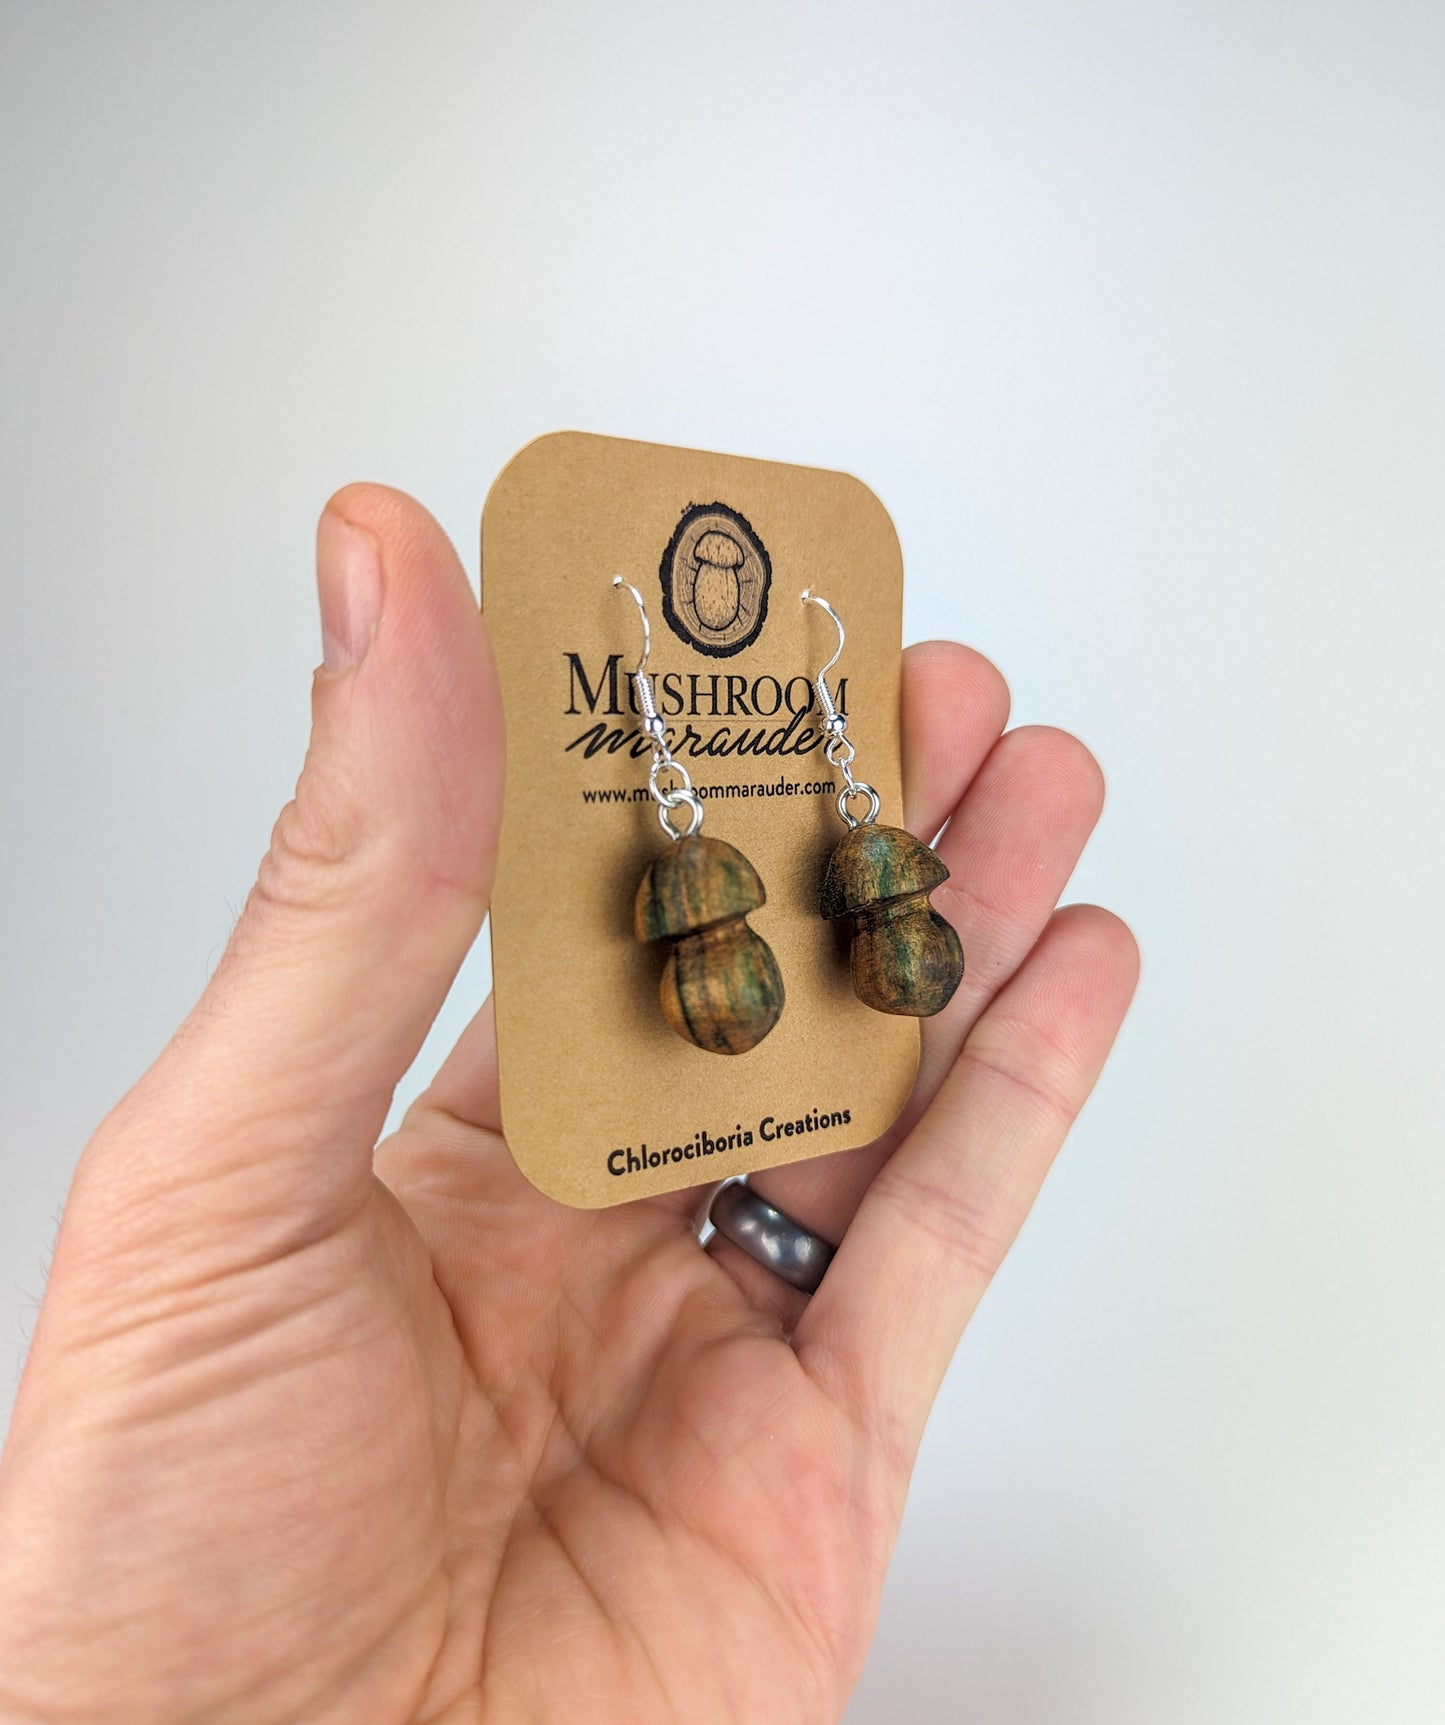 Porcini Mushroom Earrings | Carved from Naturally Fungus-Stained Wood